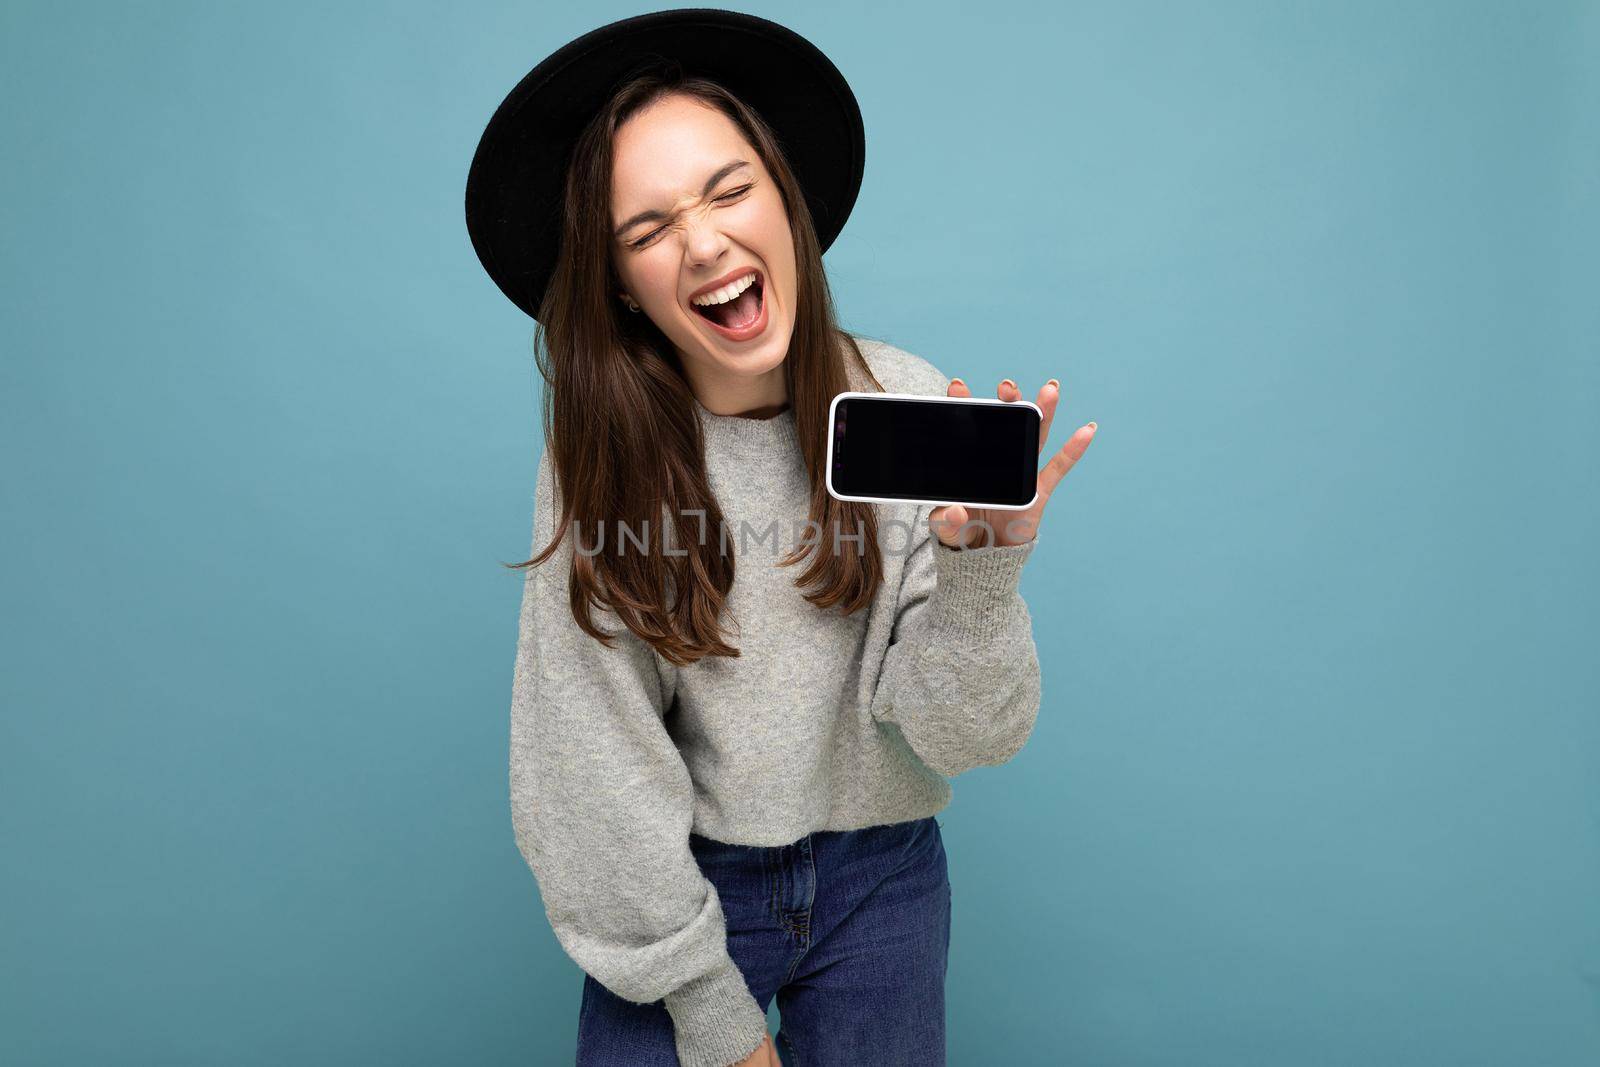 Portrait photo shot of beautiful young woman wearing black hat and grey sweater holding phone showing smartphone isolated on background with open mouth having joy by TRMK